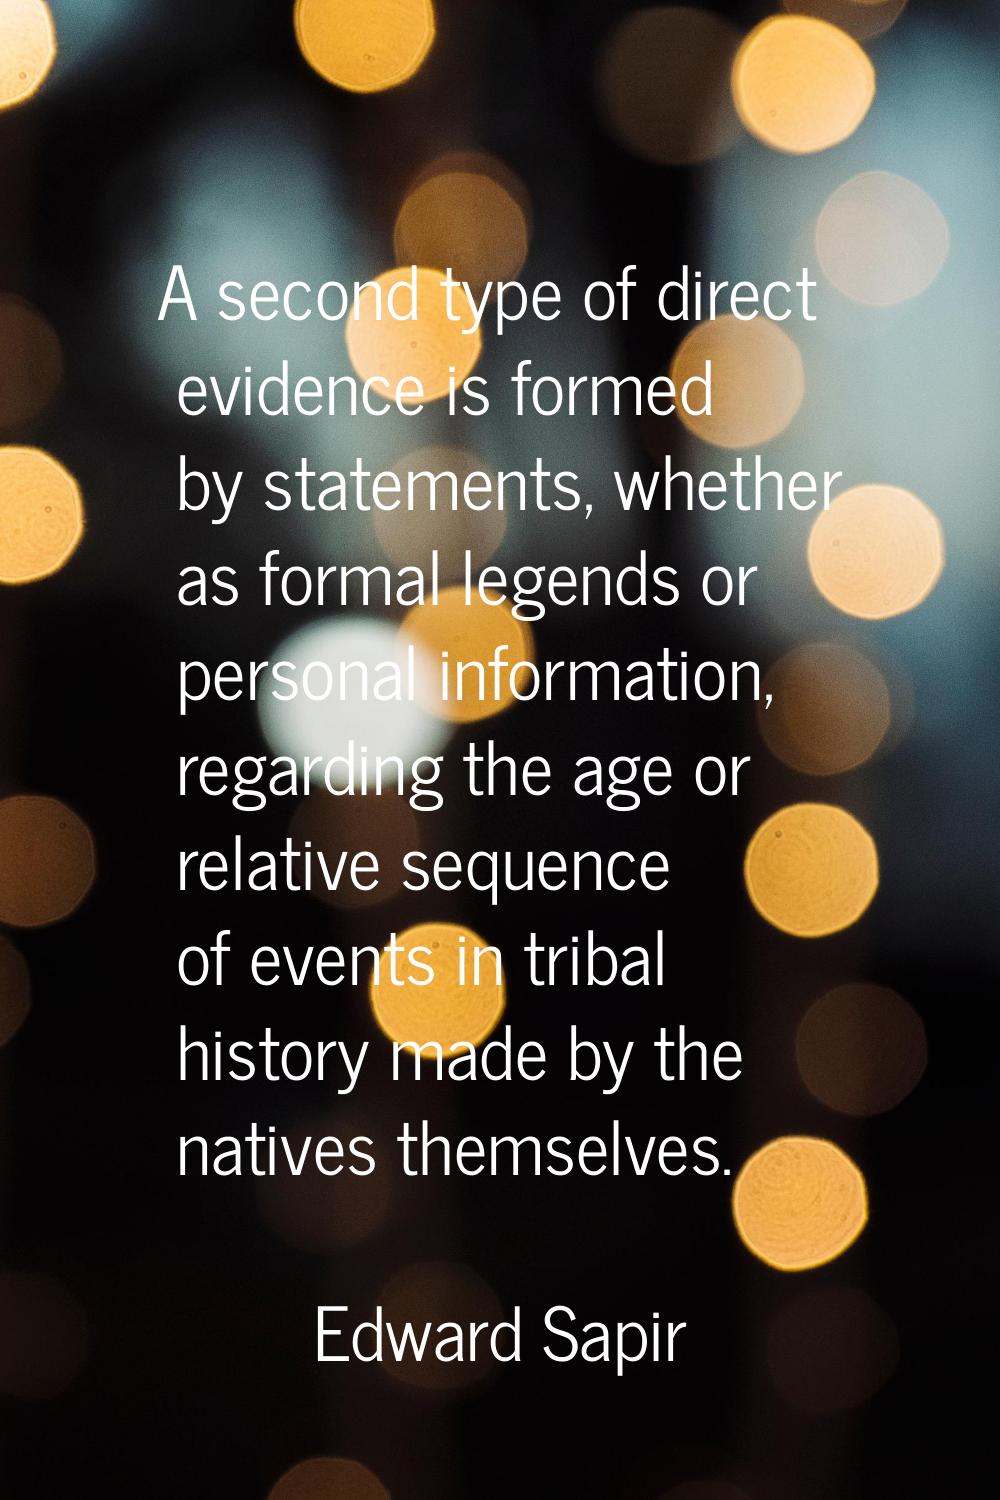 A second type of direct evidence is formed by statements, whether as formal legends or personal inf